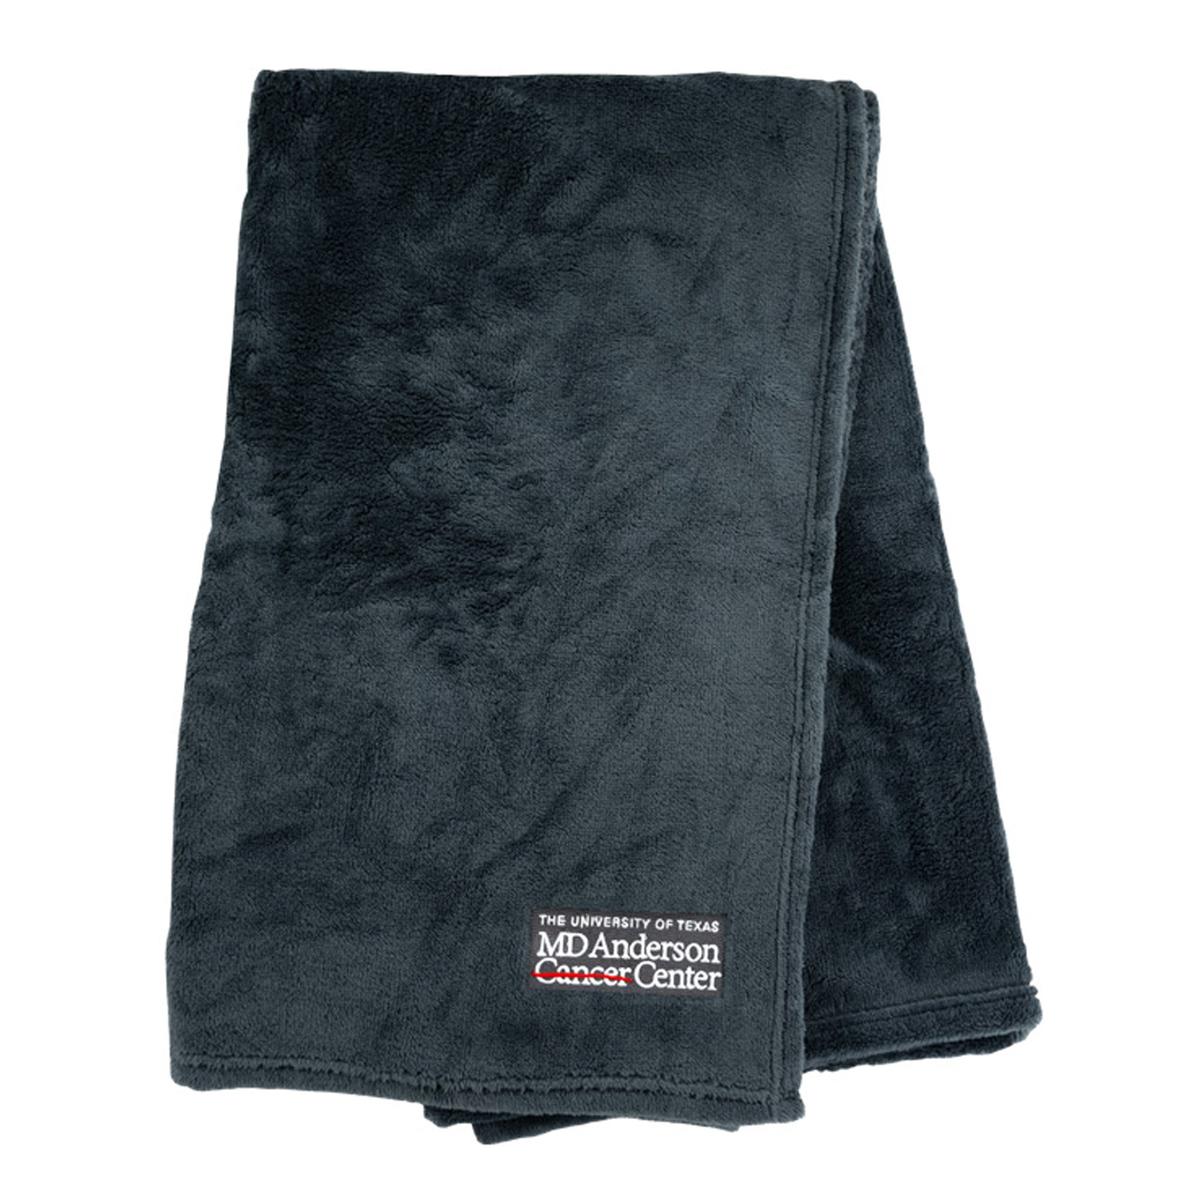 Black soft touch throw featuring the white MD Anderson logo on the corner.